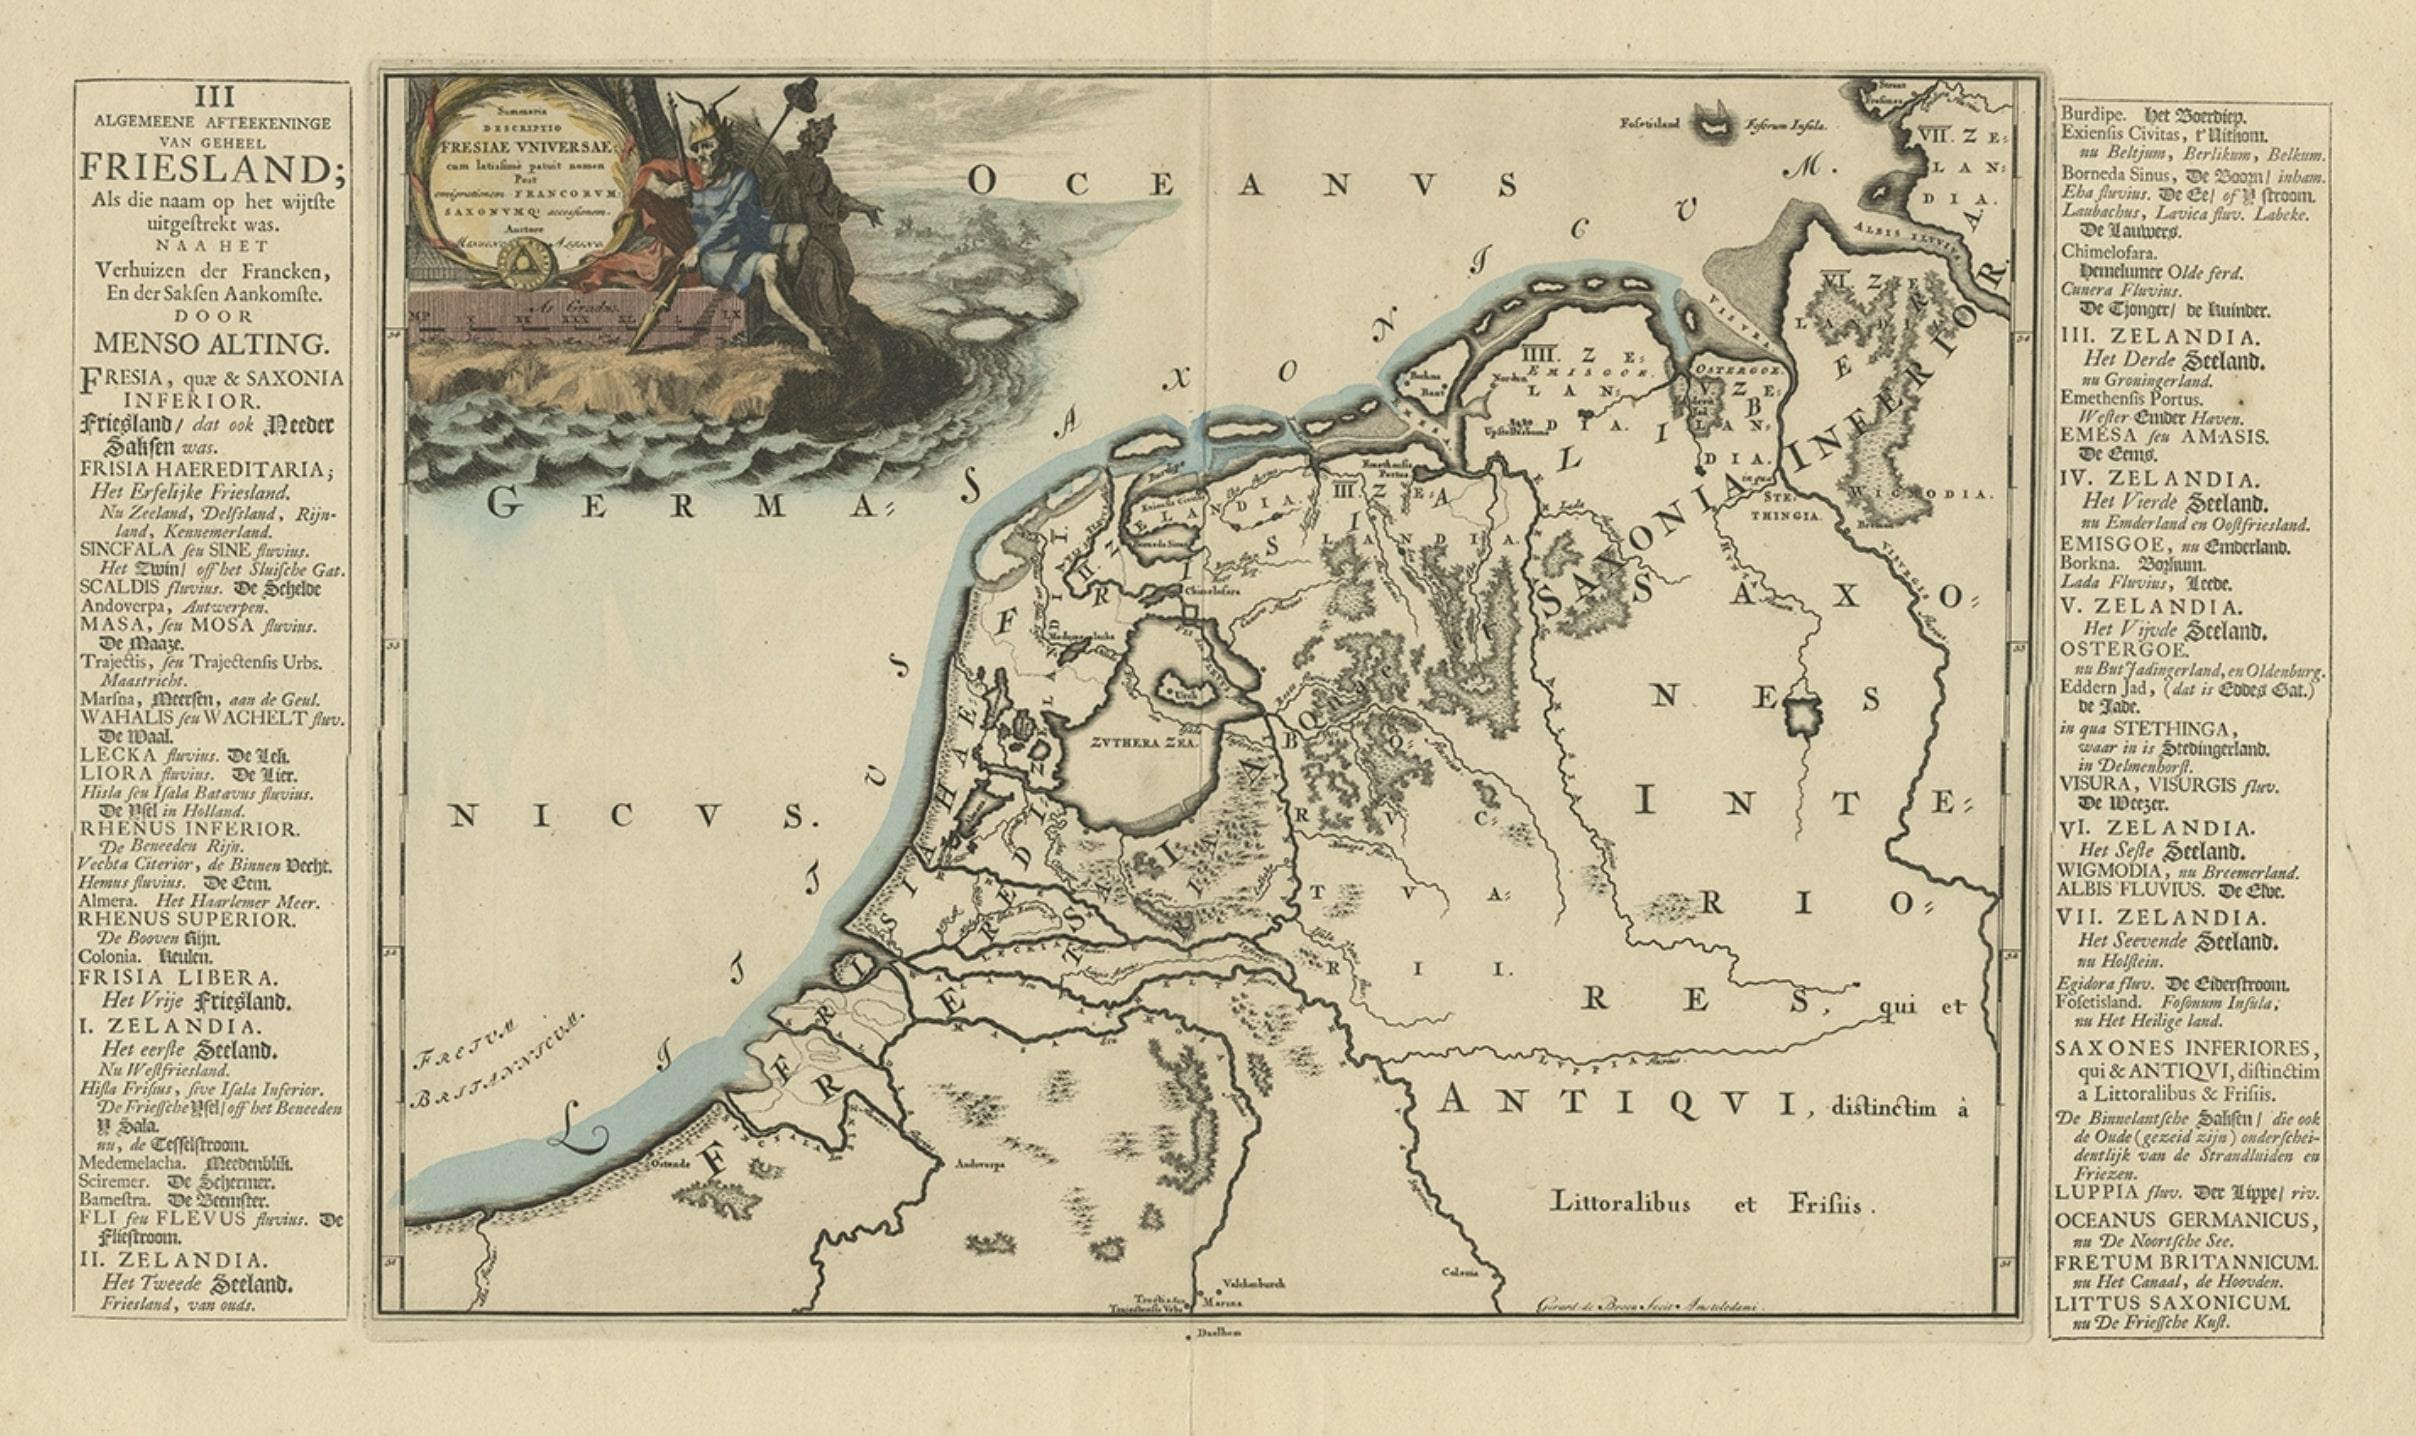 Antique map Friesland titled 'Summaria descriptio Fresiae Universae (..)'. 

Old map of Friesland, the Netherlands. Depicts the general delineation of Friesland during its widest spread after the Franks left and the Saxens came. Originates from